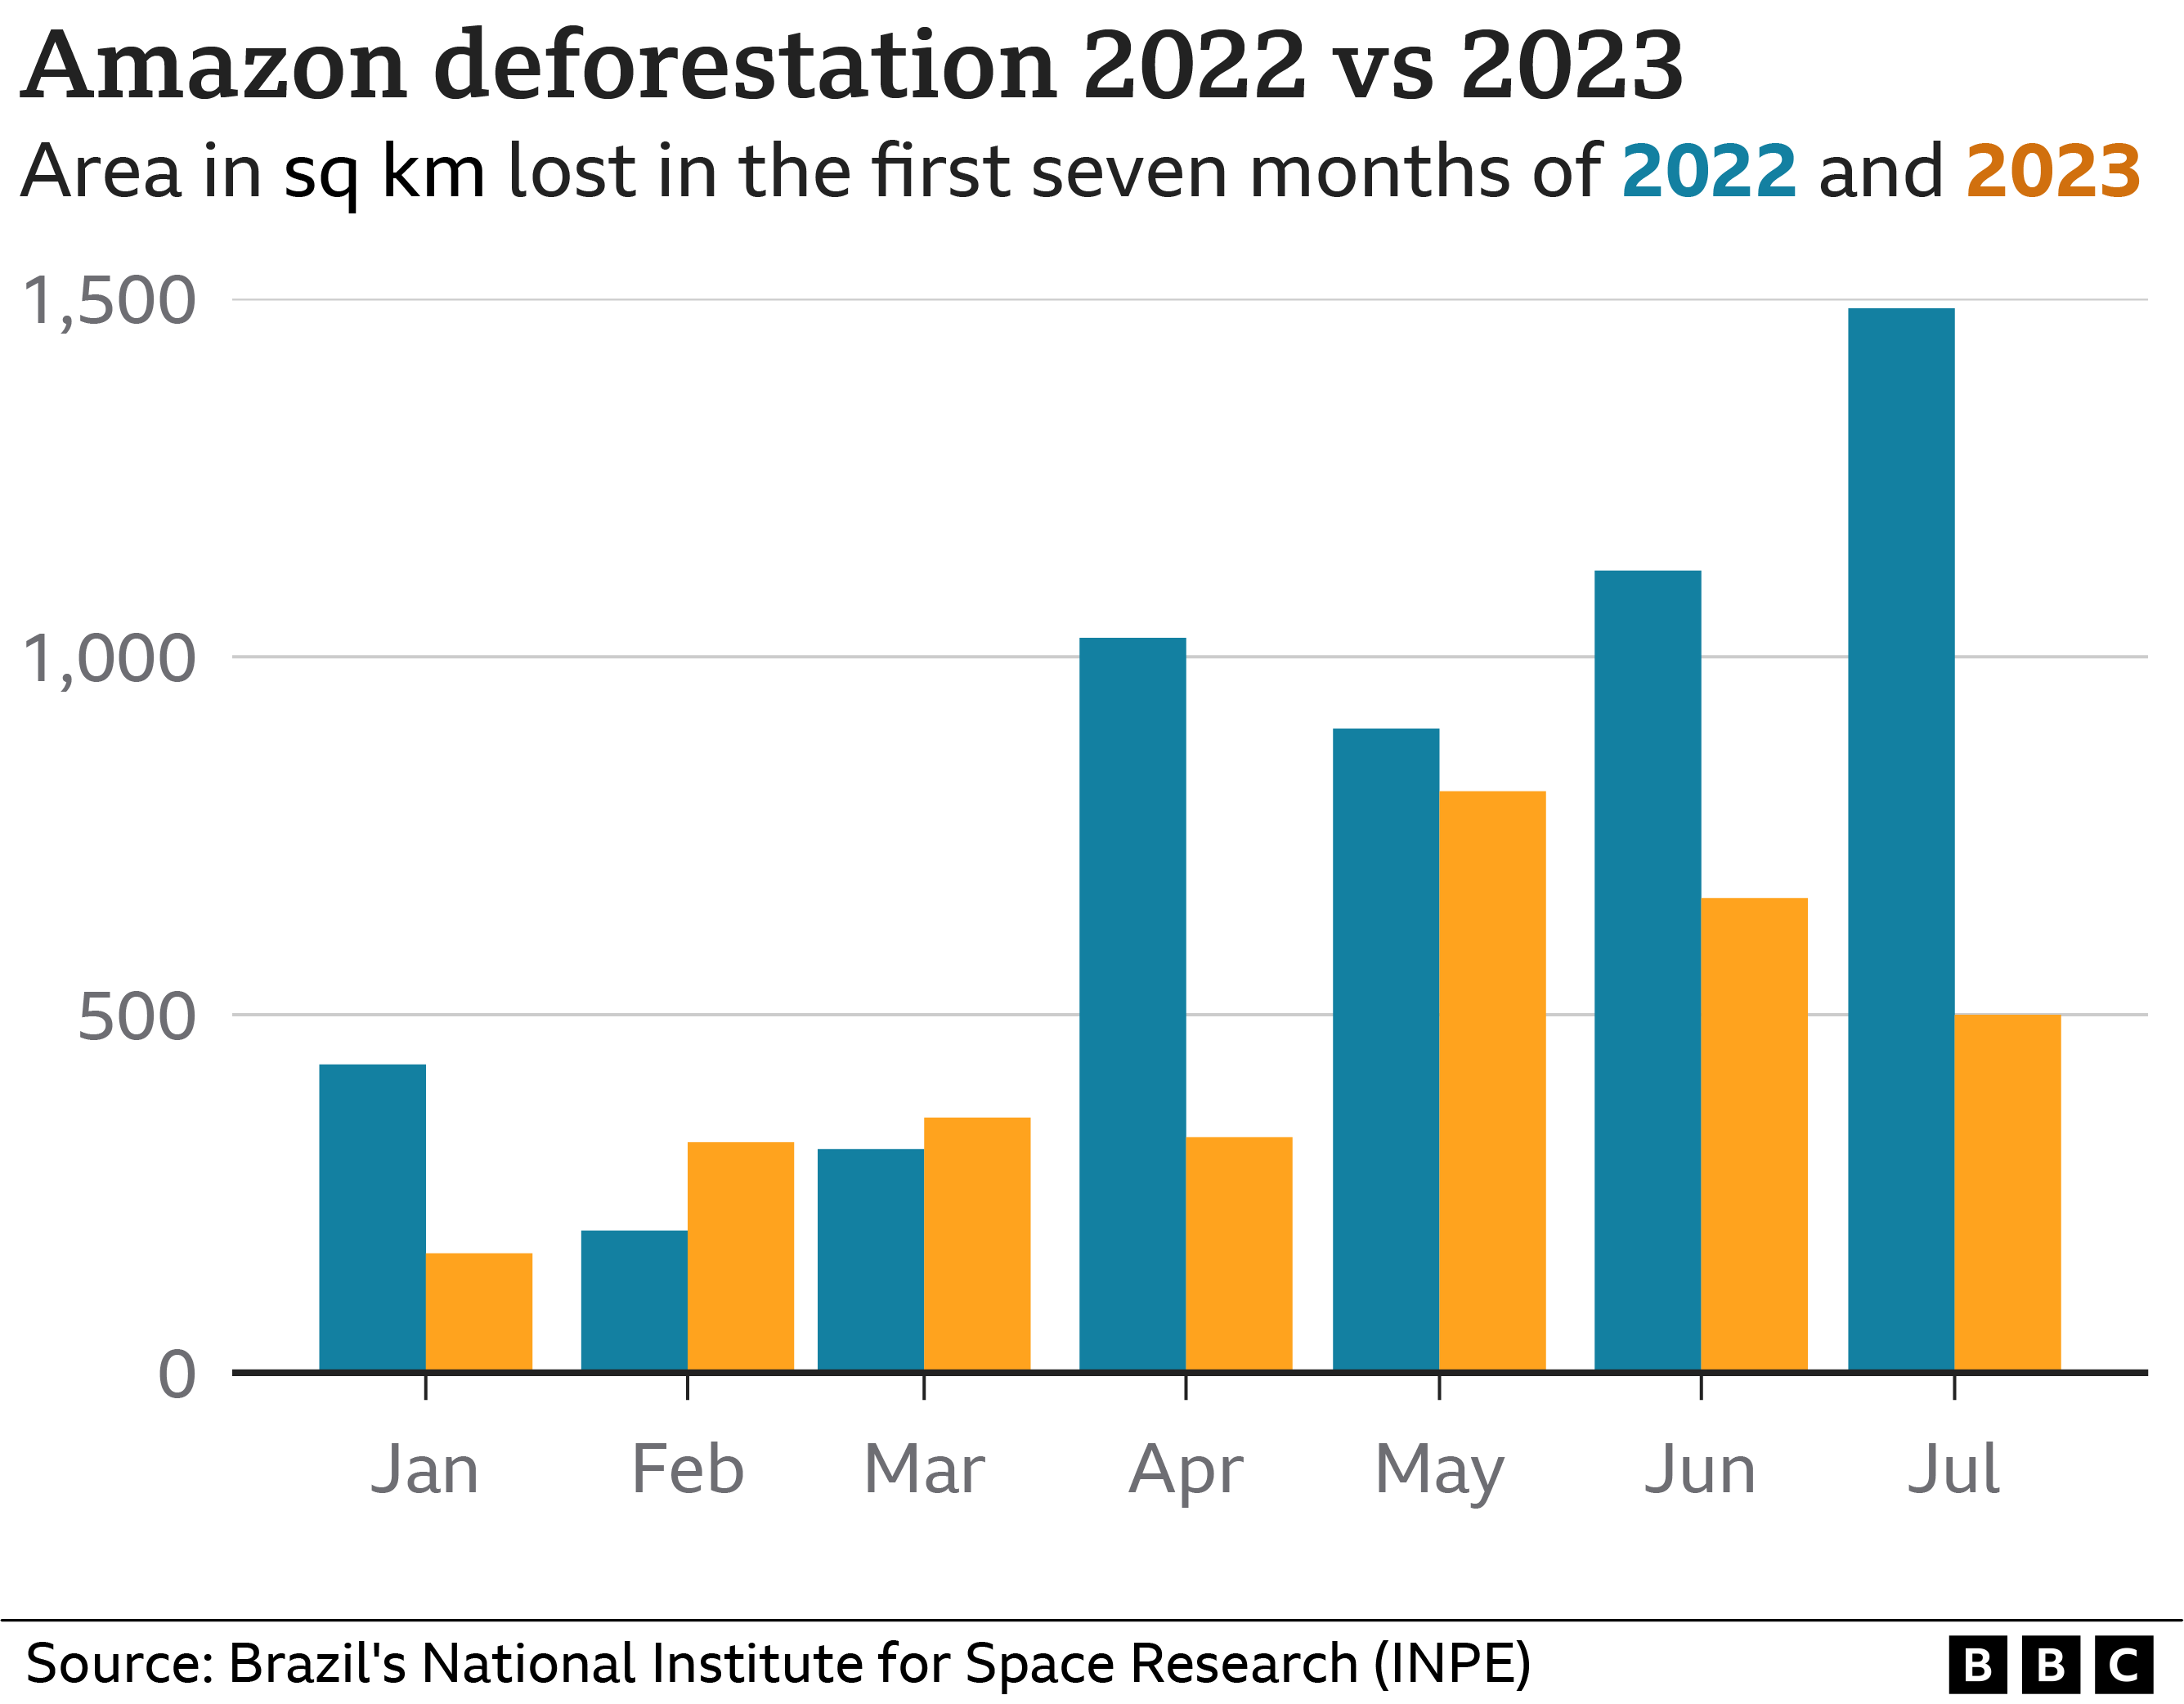 Bar chart showing lower deforestation rates in 2023 compared to 2022 across most months from January to July